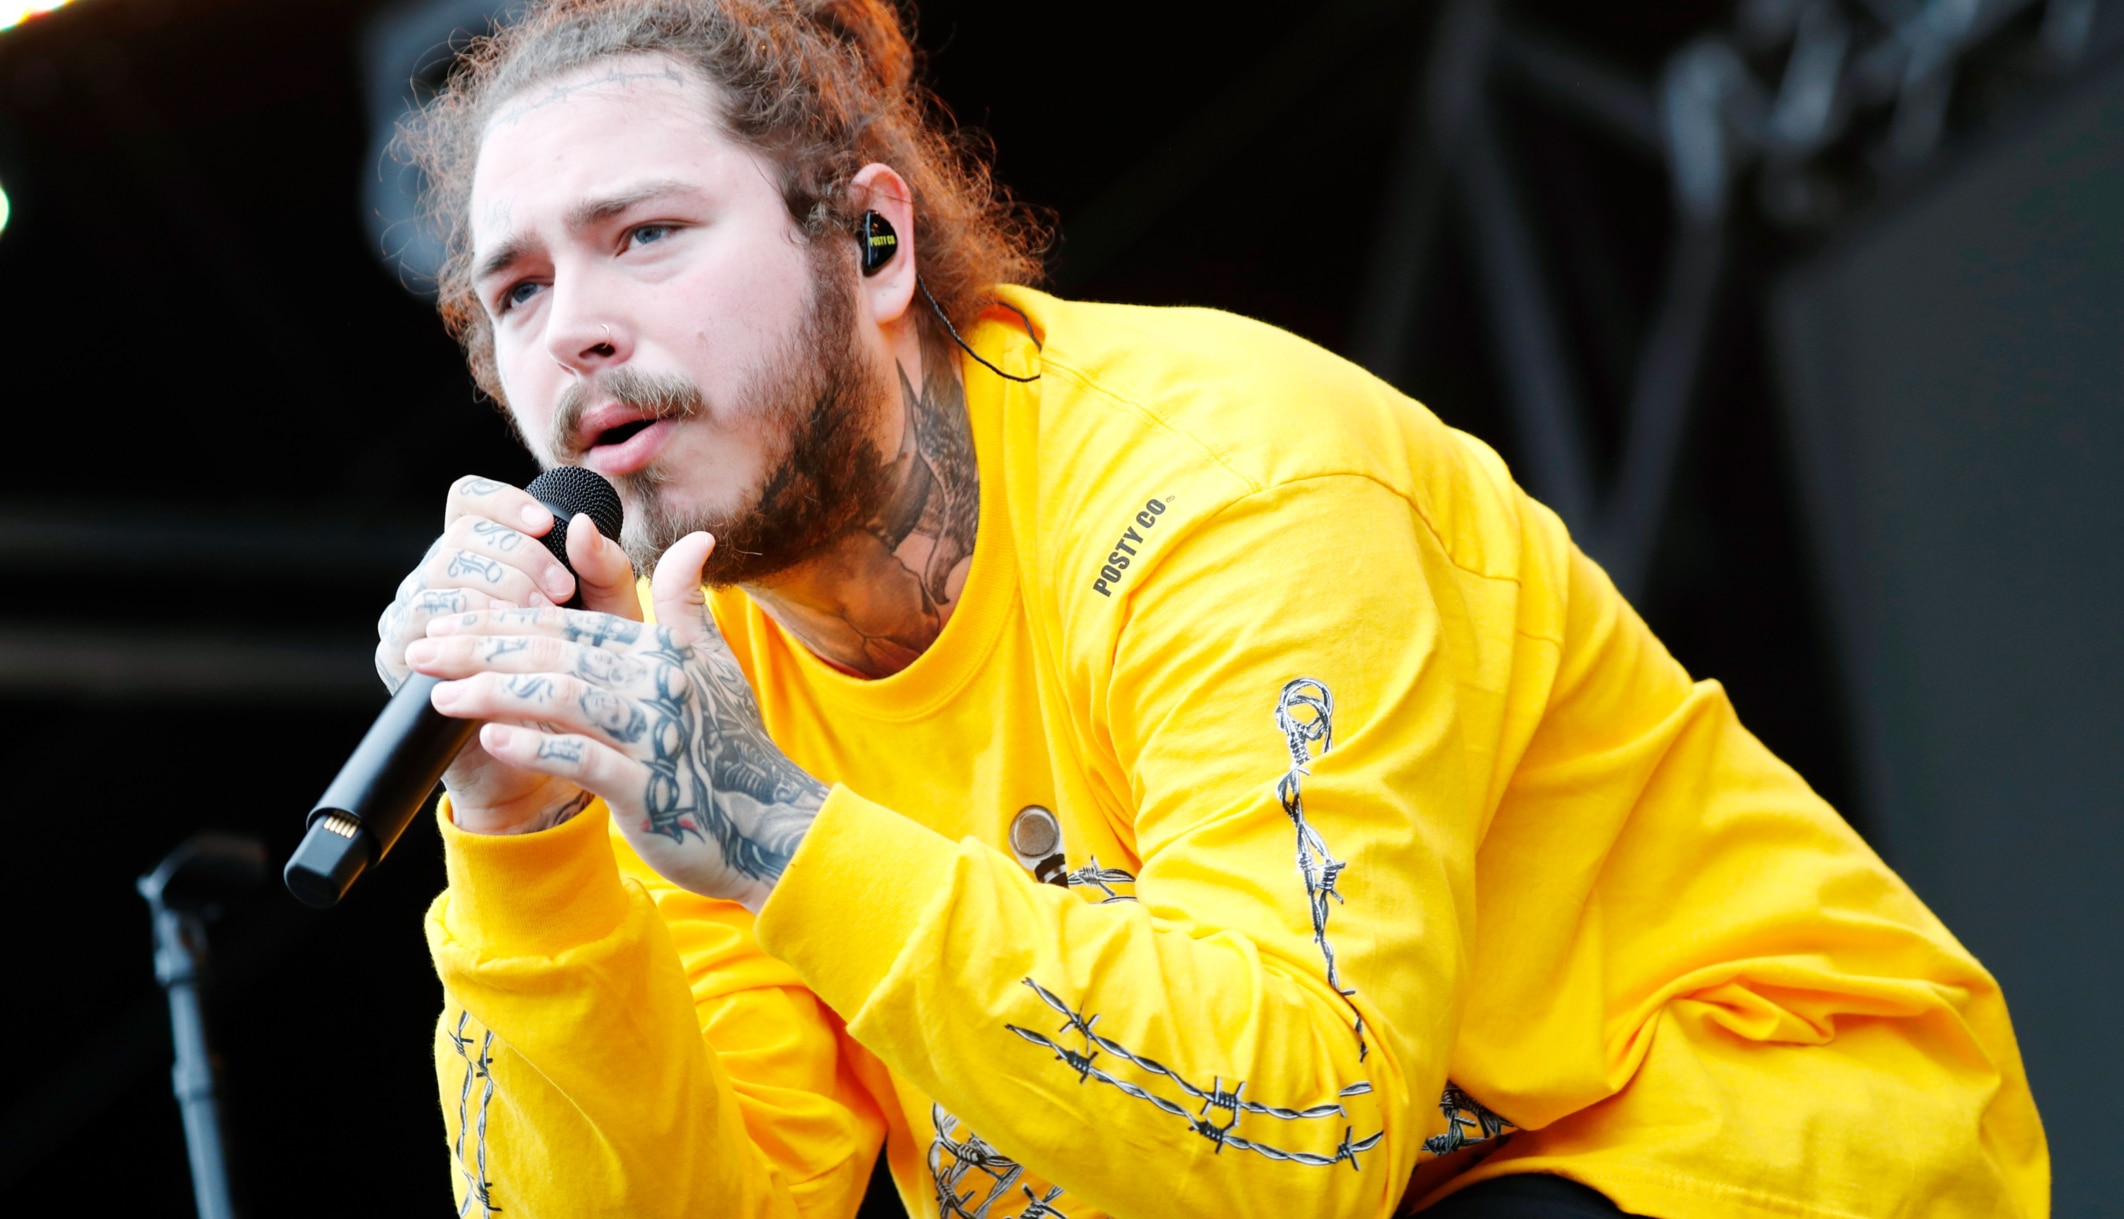 Post Malone's Rolls Royce Crashes Weeks After Private Plane Forced To ...